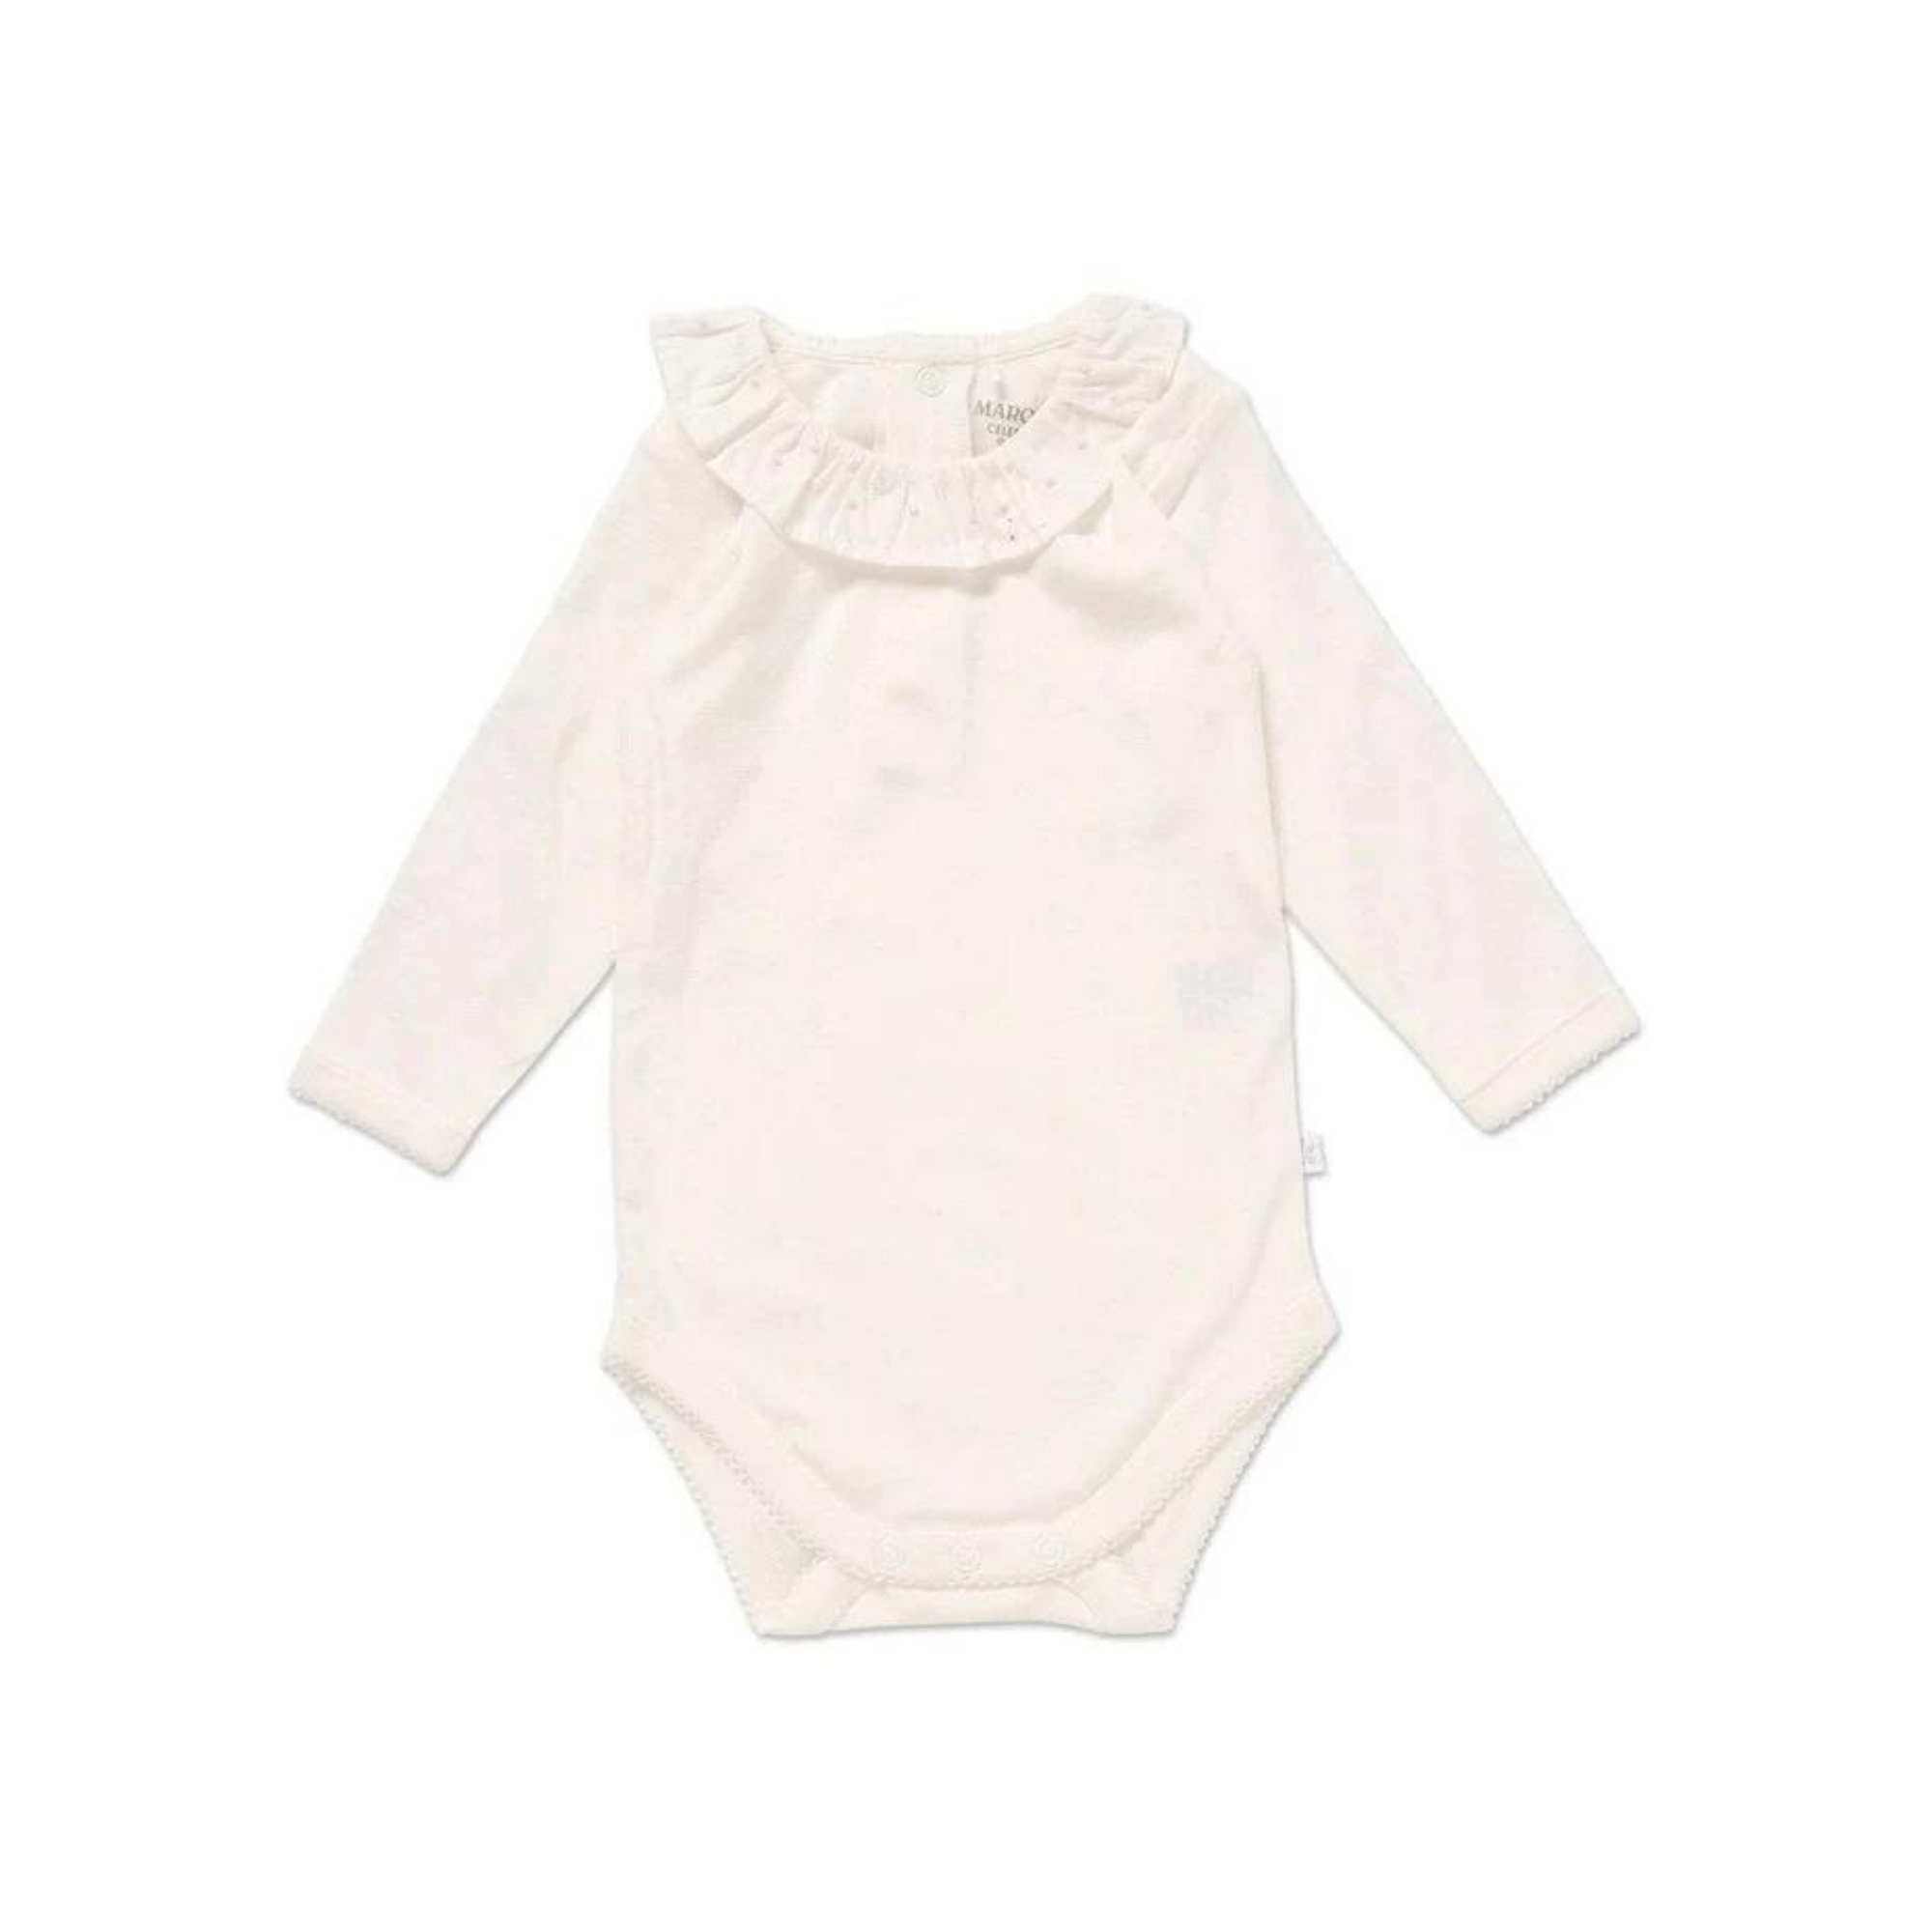 Marquise Heritage Collection - Woven Collar Bodysuit Cream